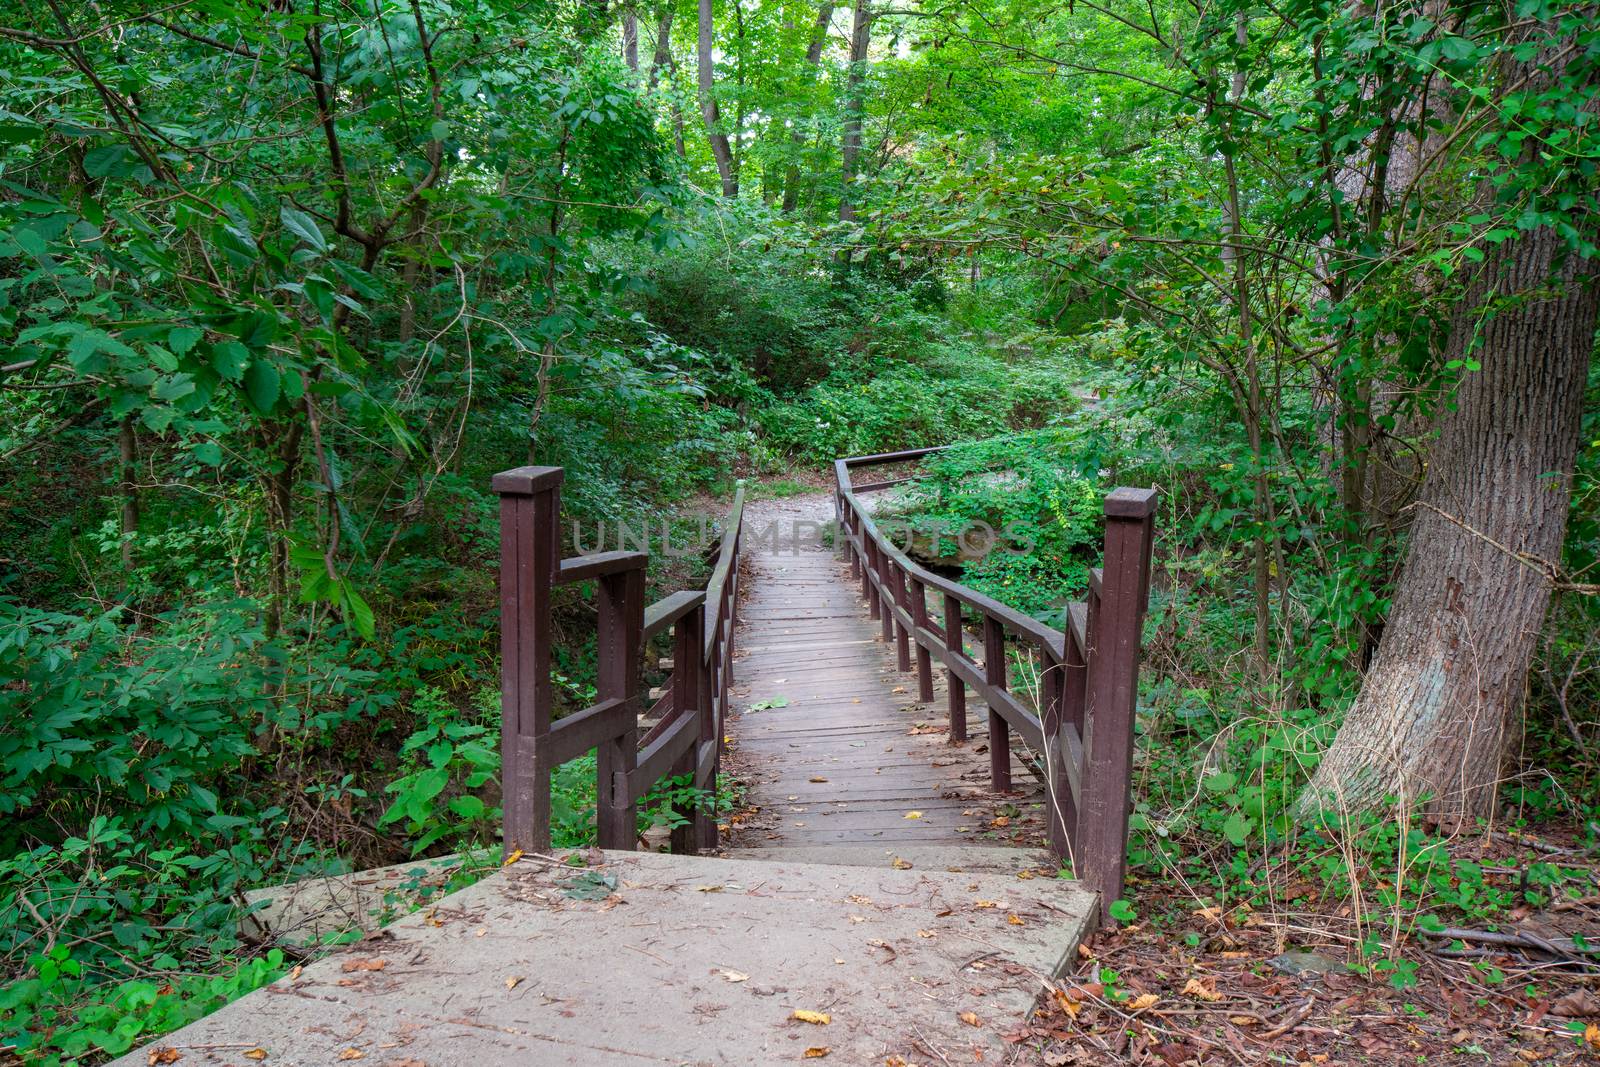 An Uneven Wooden Bridge Crossing a River in a Lush Green Forest